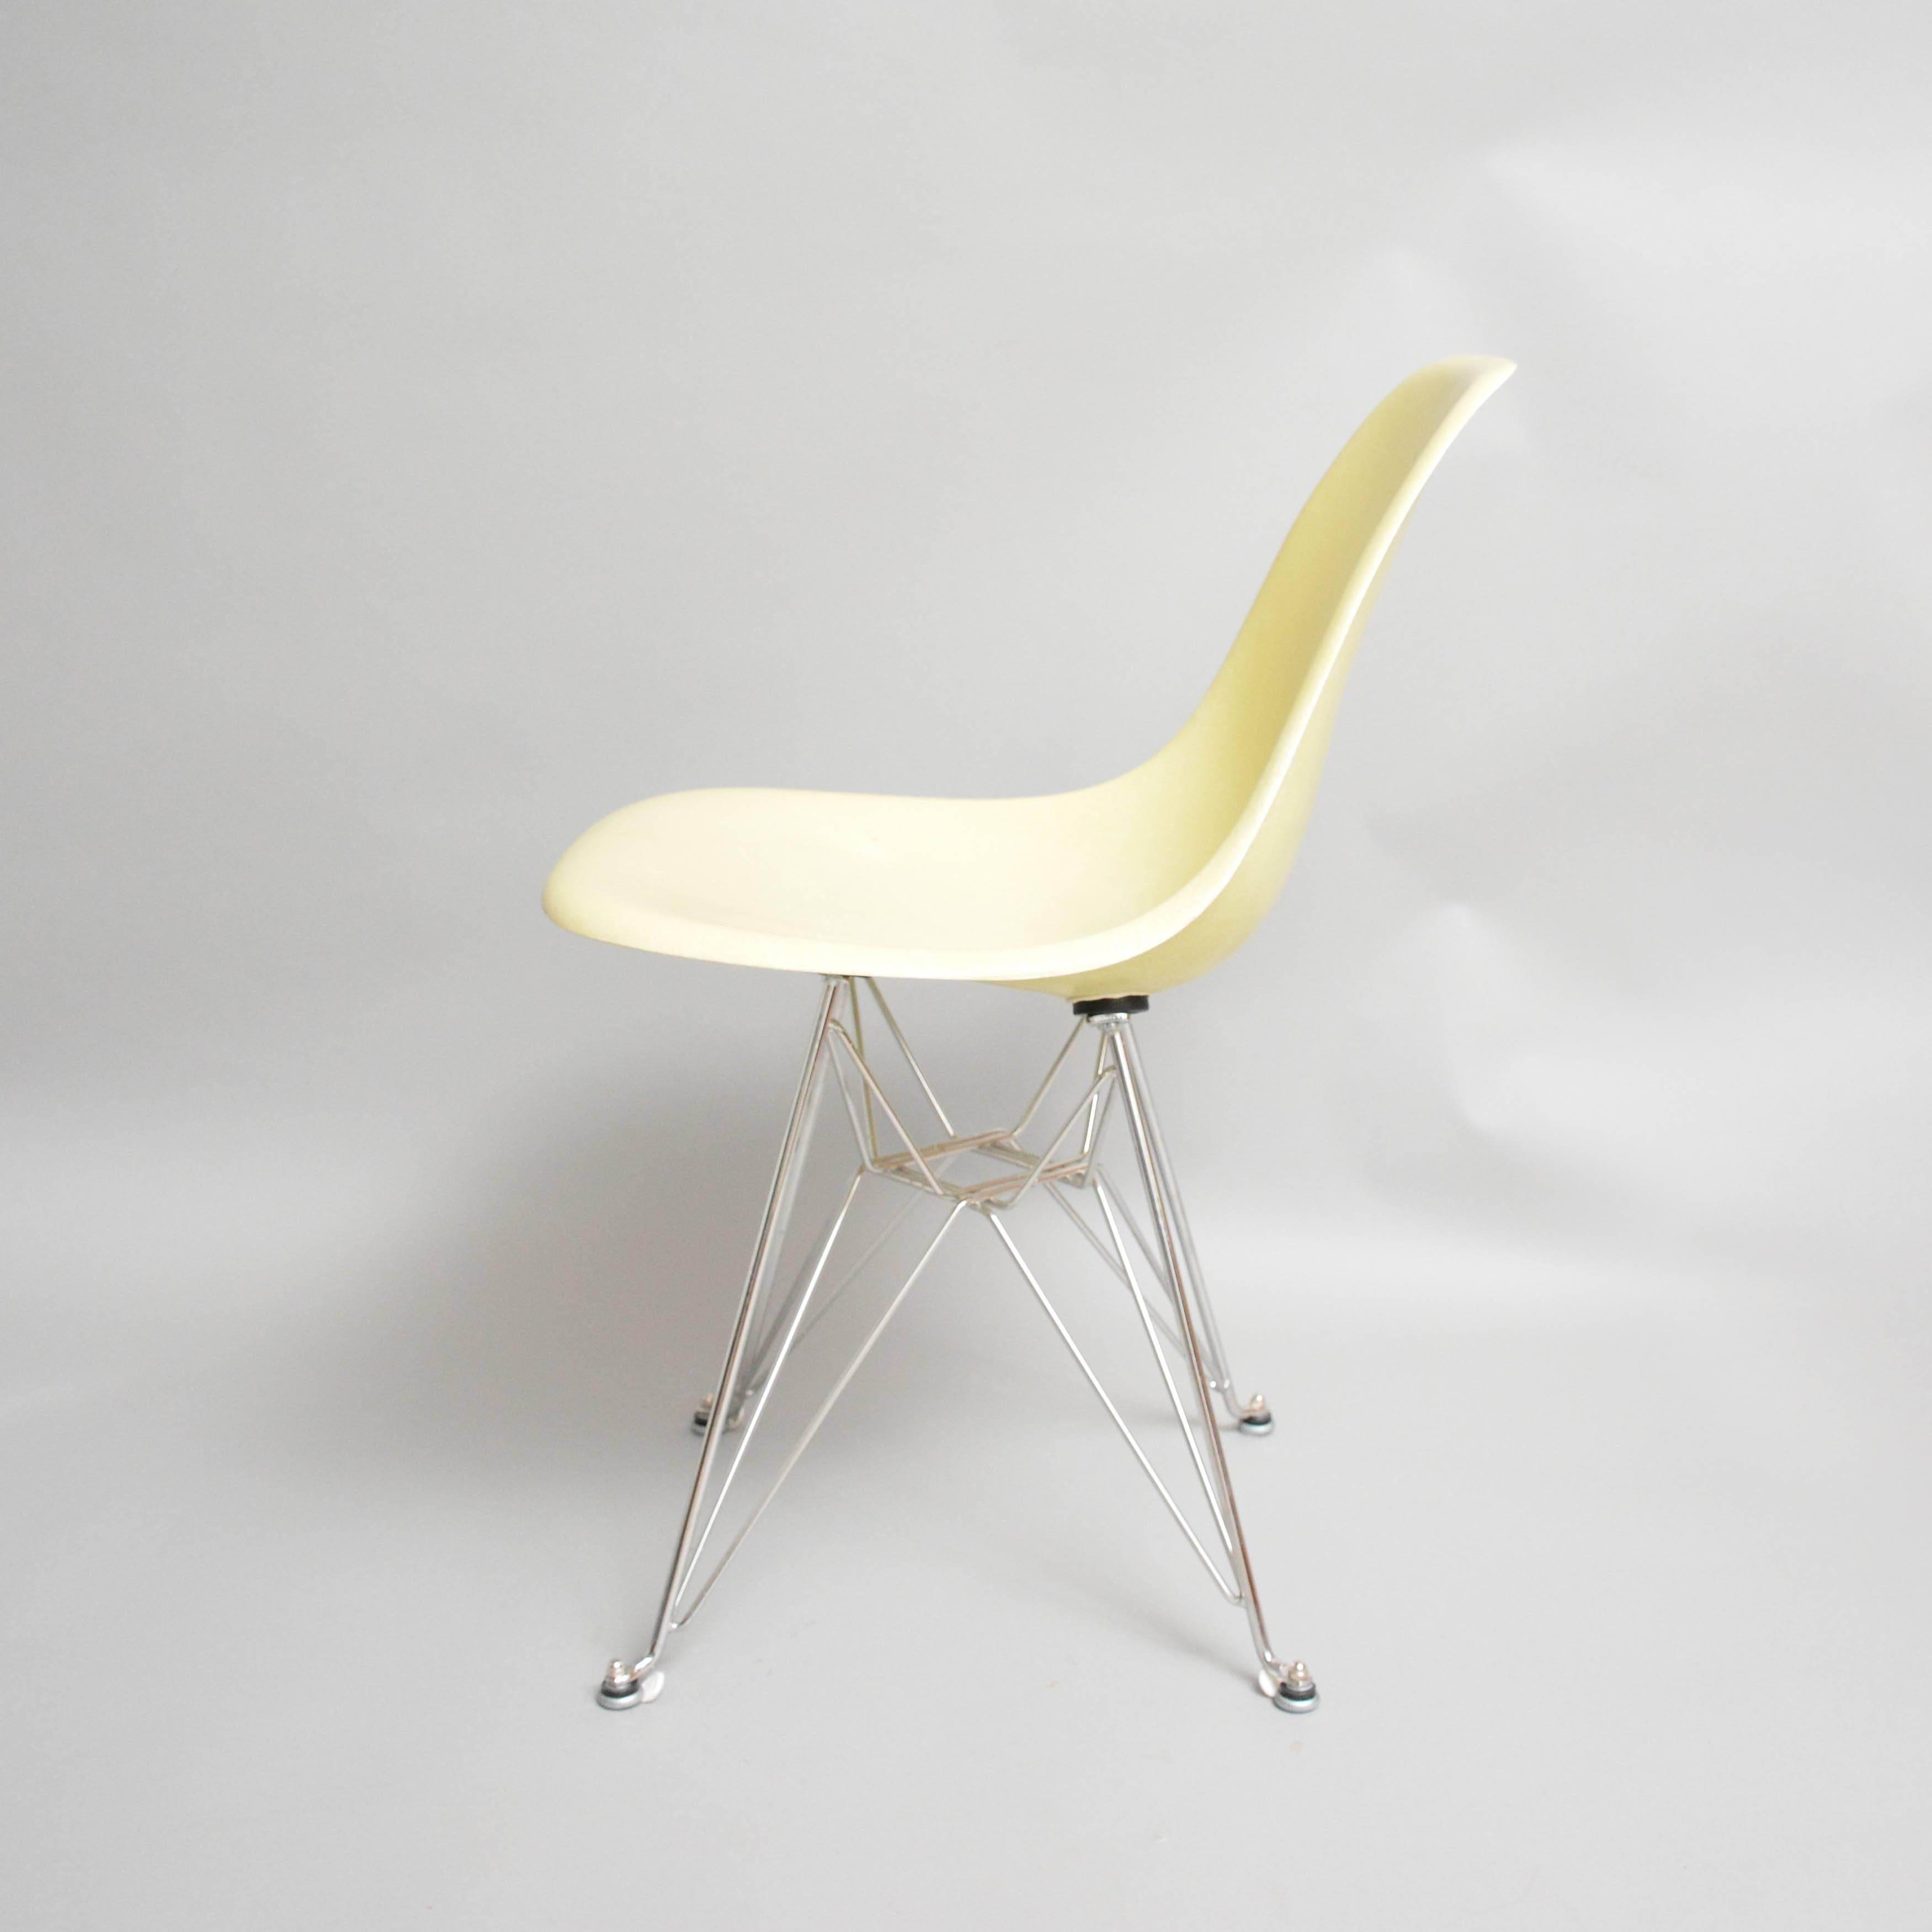 Eames side shell chair in lemon yellow and on eiffeltower reproduction base. The shells are produced by Herman Miller, US. Four chairs available.